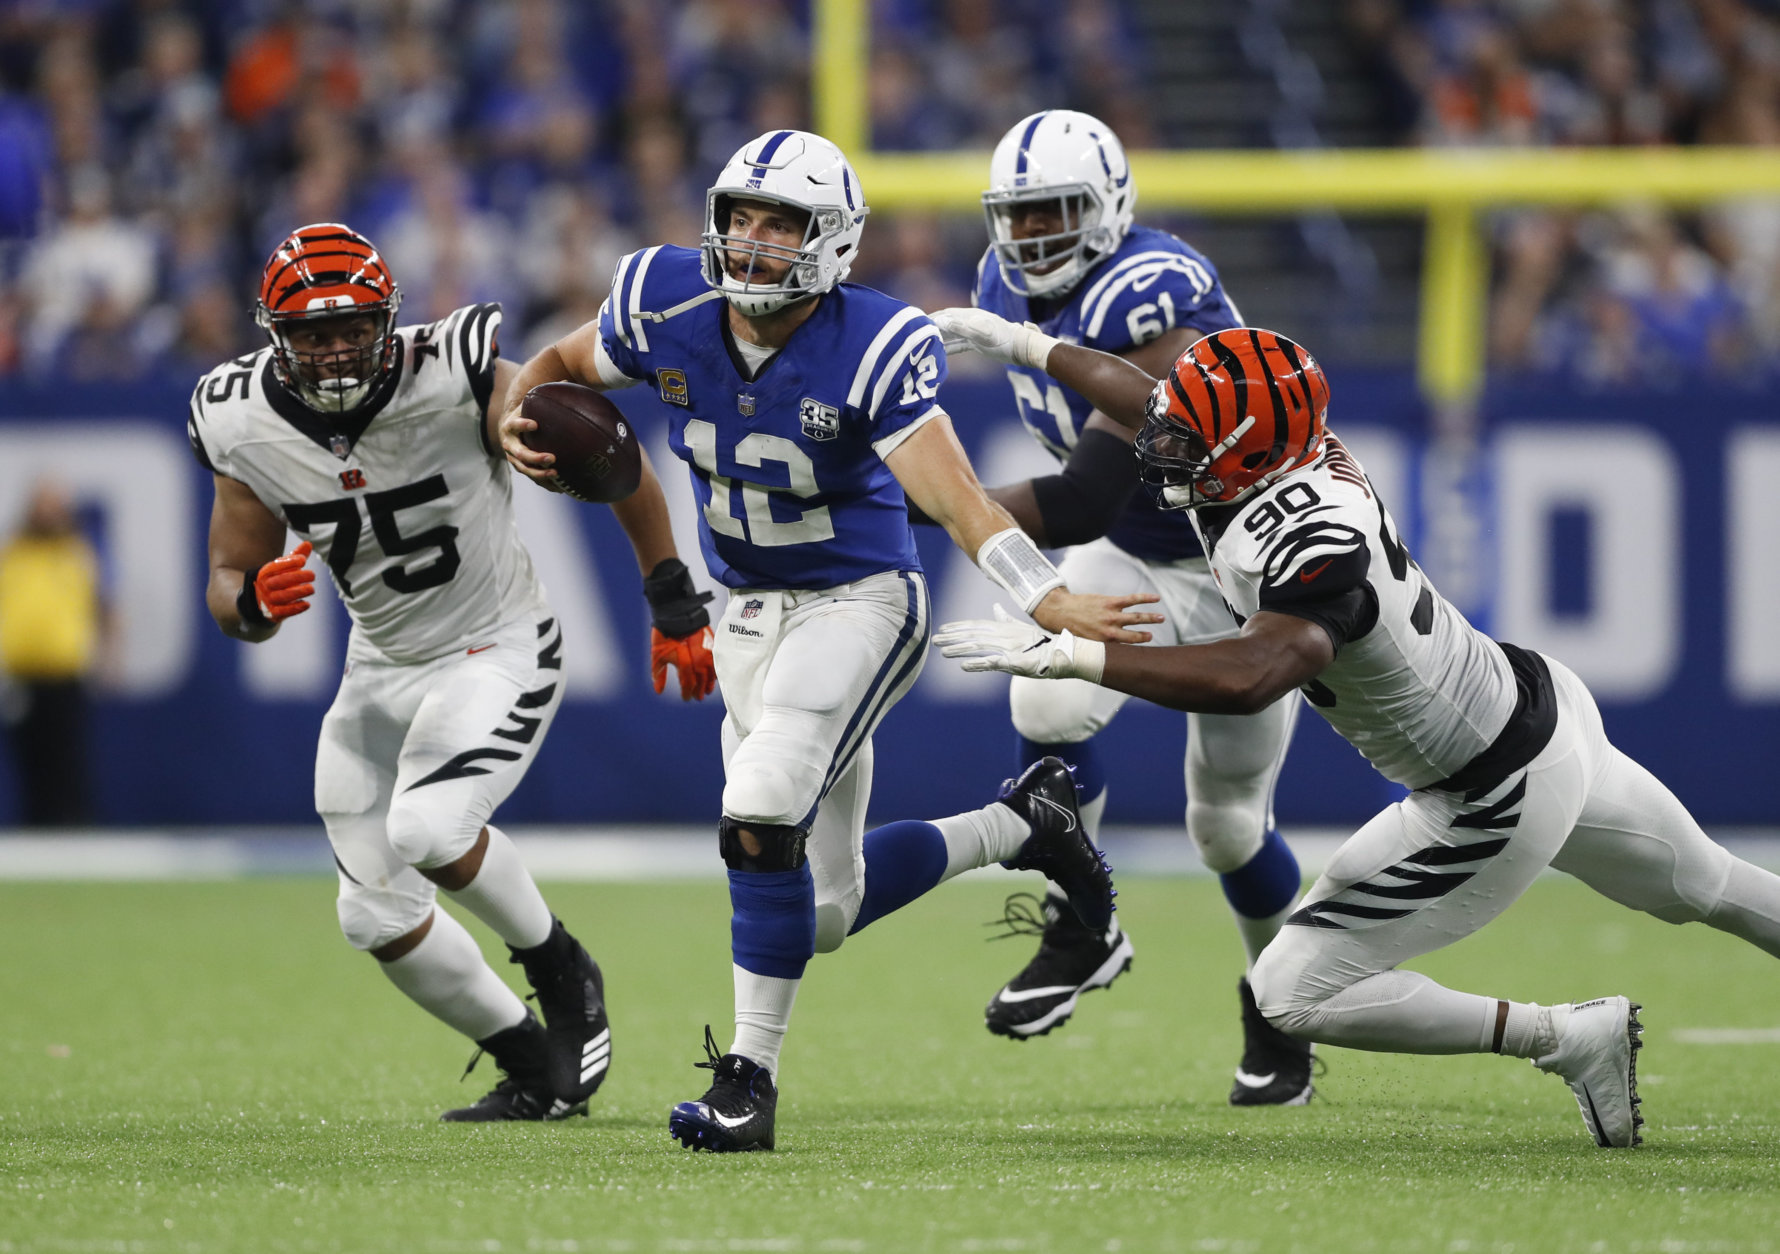 Indianapolis Colts quarterback Andrew Luck (12) is chased by Cincinnati Bengals defensive end Jordan Willis (75) and defensive end Michael Johnson (90) during the second half of an NFL football game in Indianapolis, Sunday, Sept. 9, 2018. The Bengals defeated the Colts 34-23. (AP Photo/Jeff Roberson)